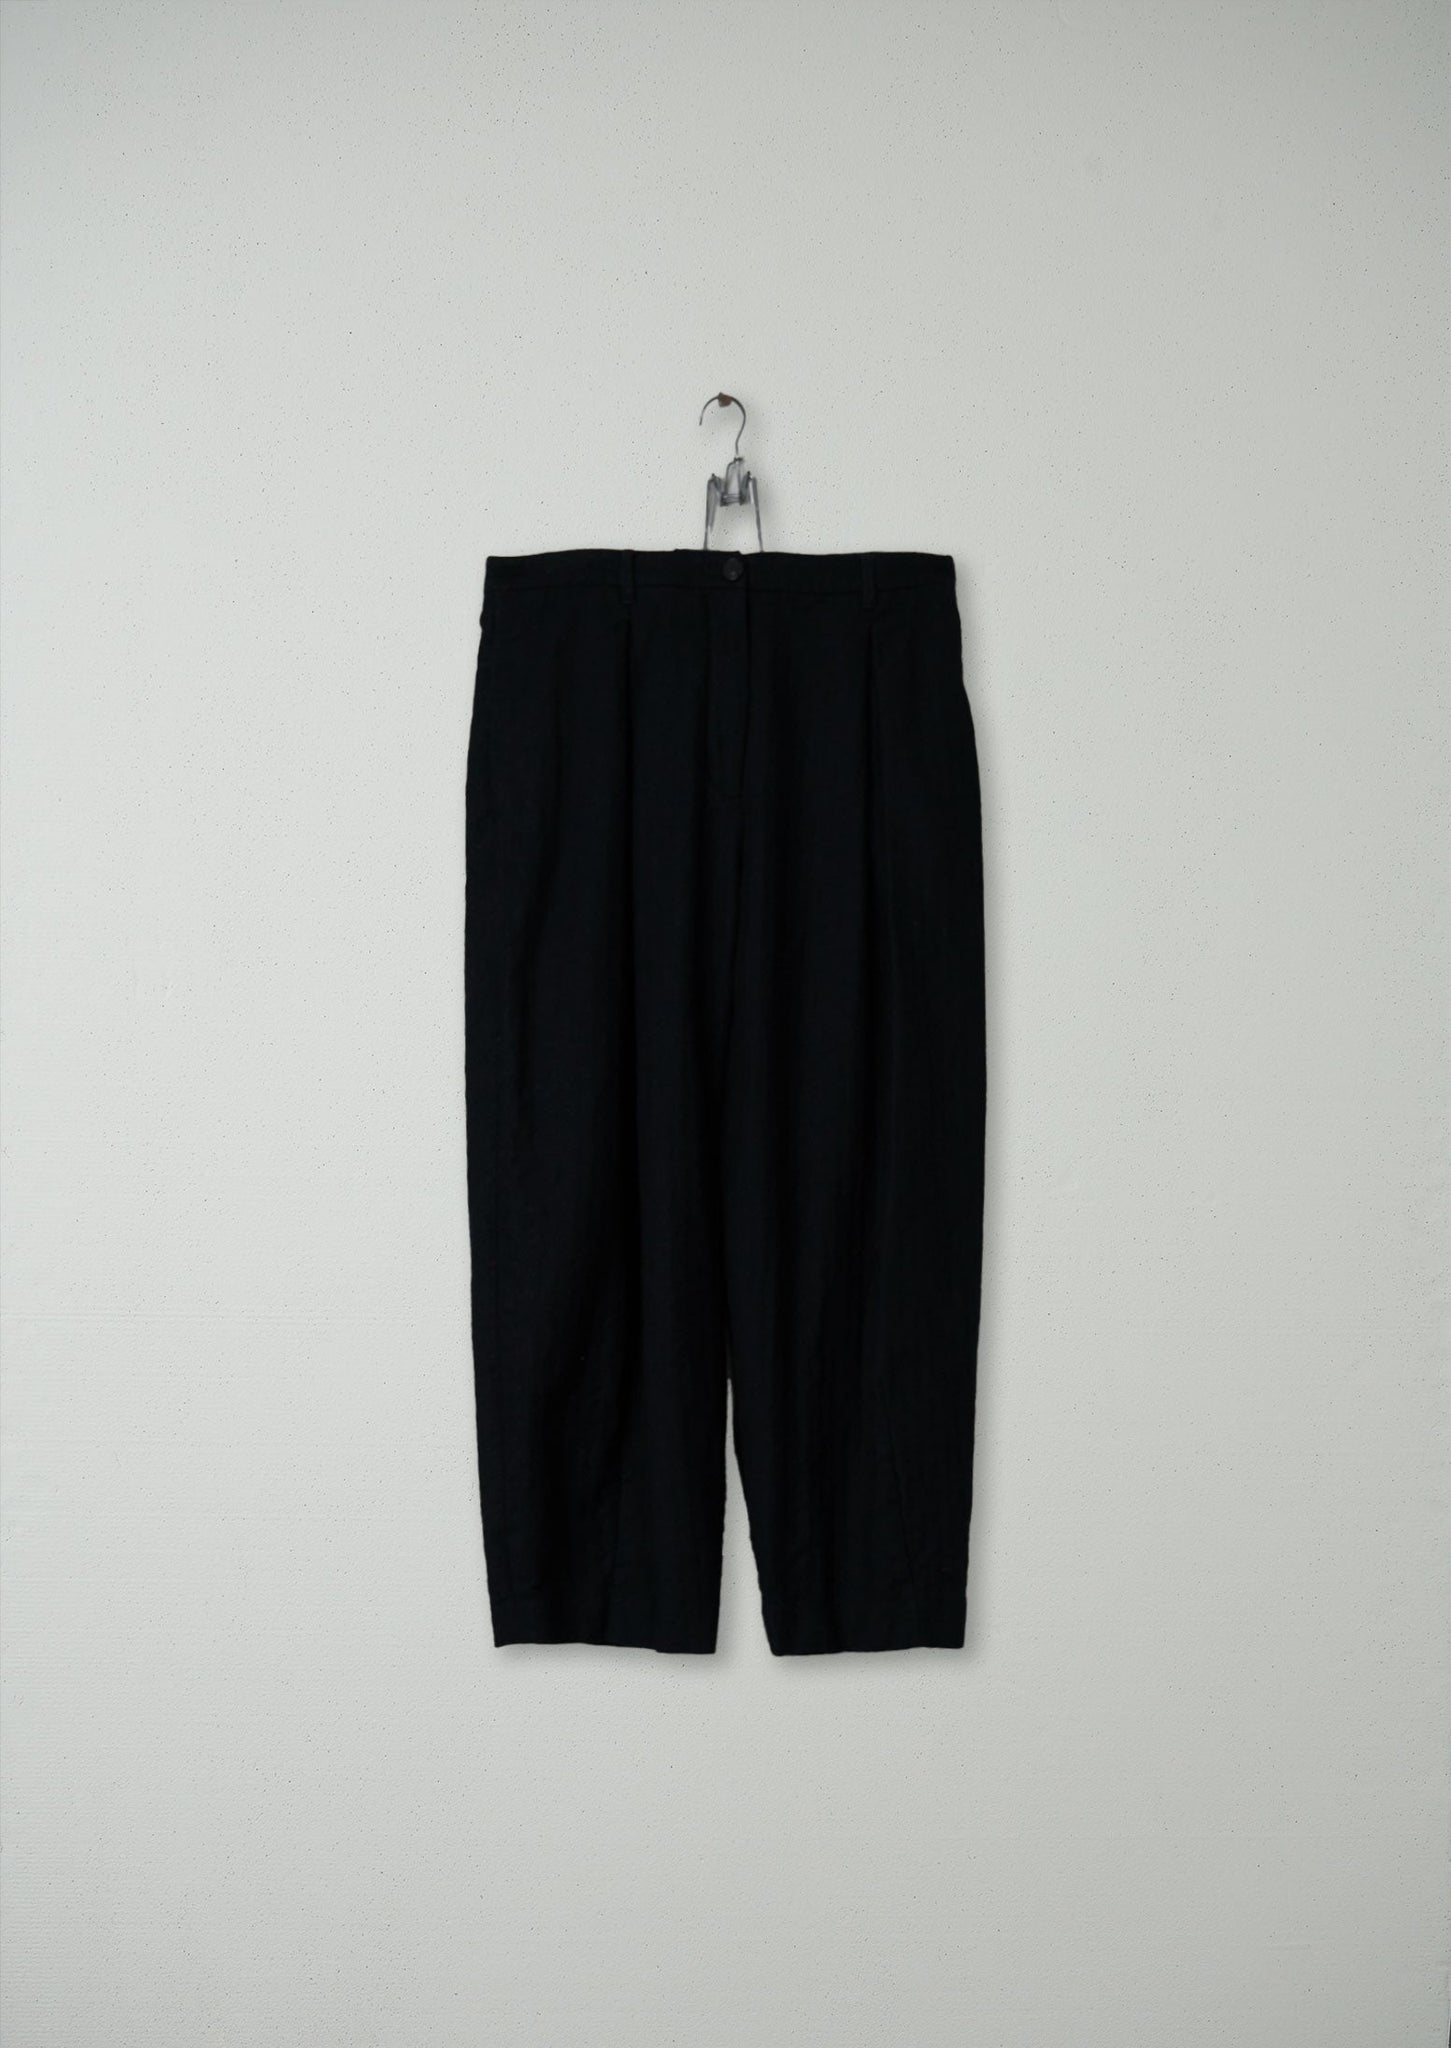 Reworn Tapered Trousers Size 12 (159) | Black